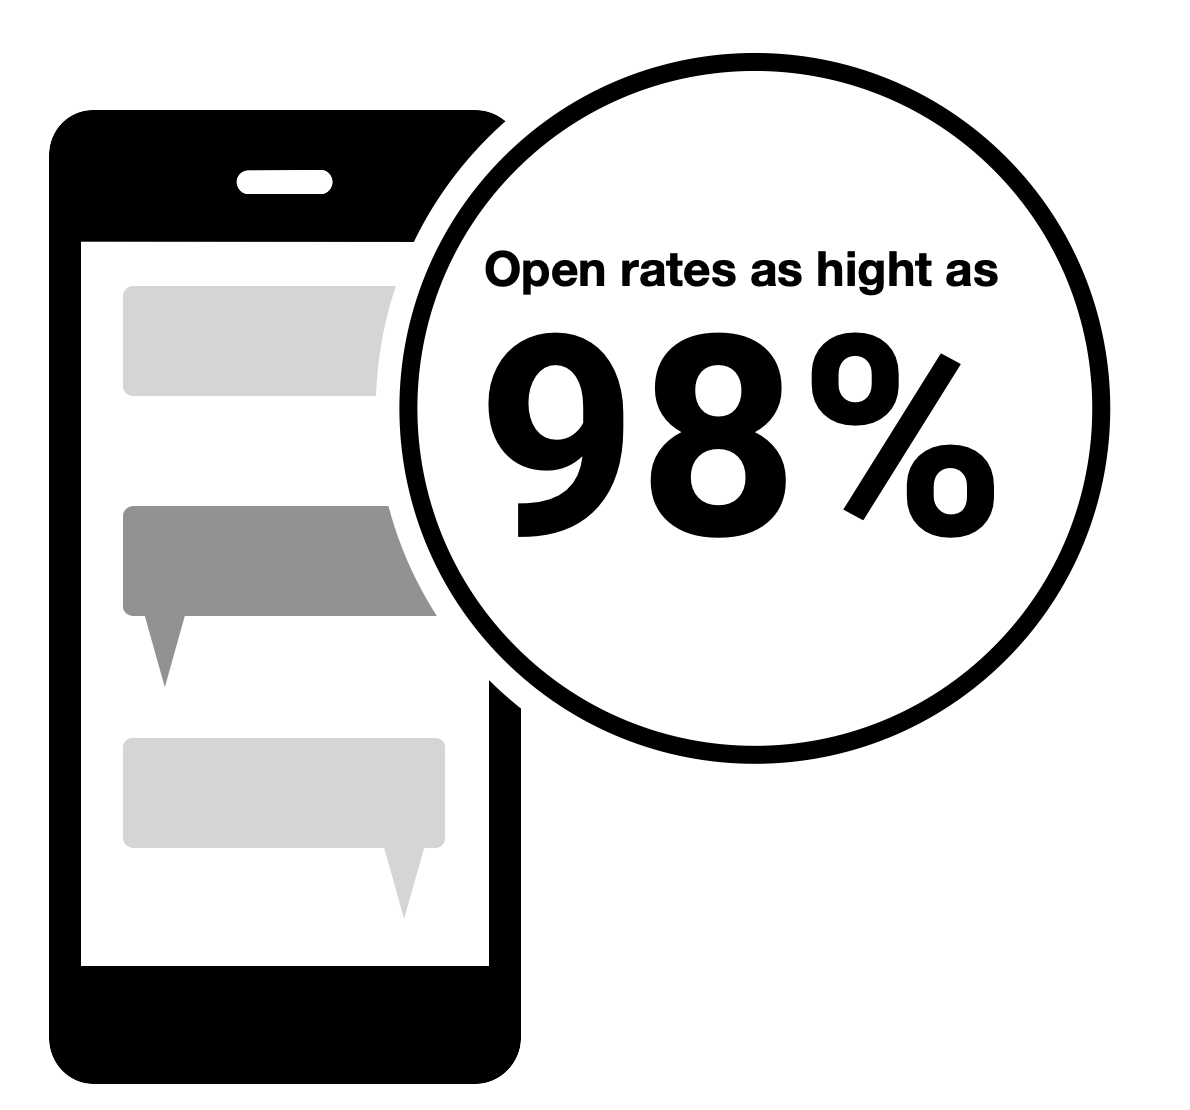 SMS have a 98% open rate